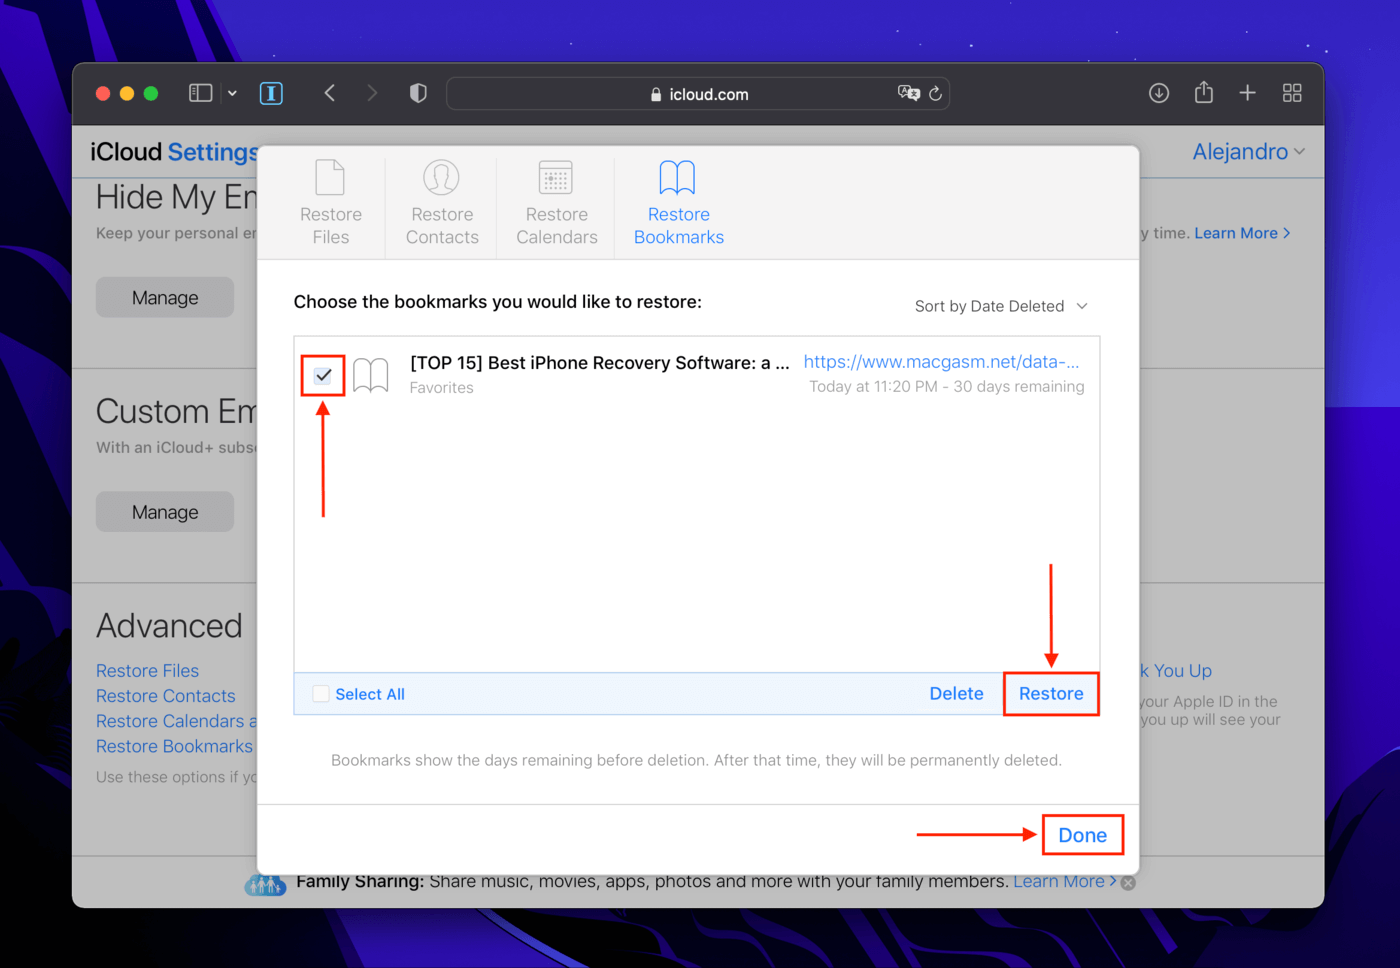 Bookmark recovery selection dialogue box in the iCloud website